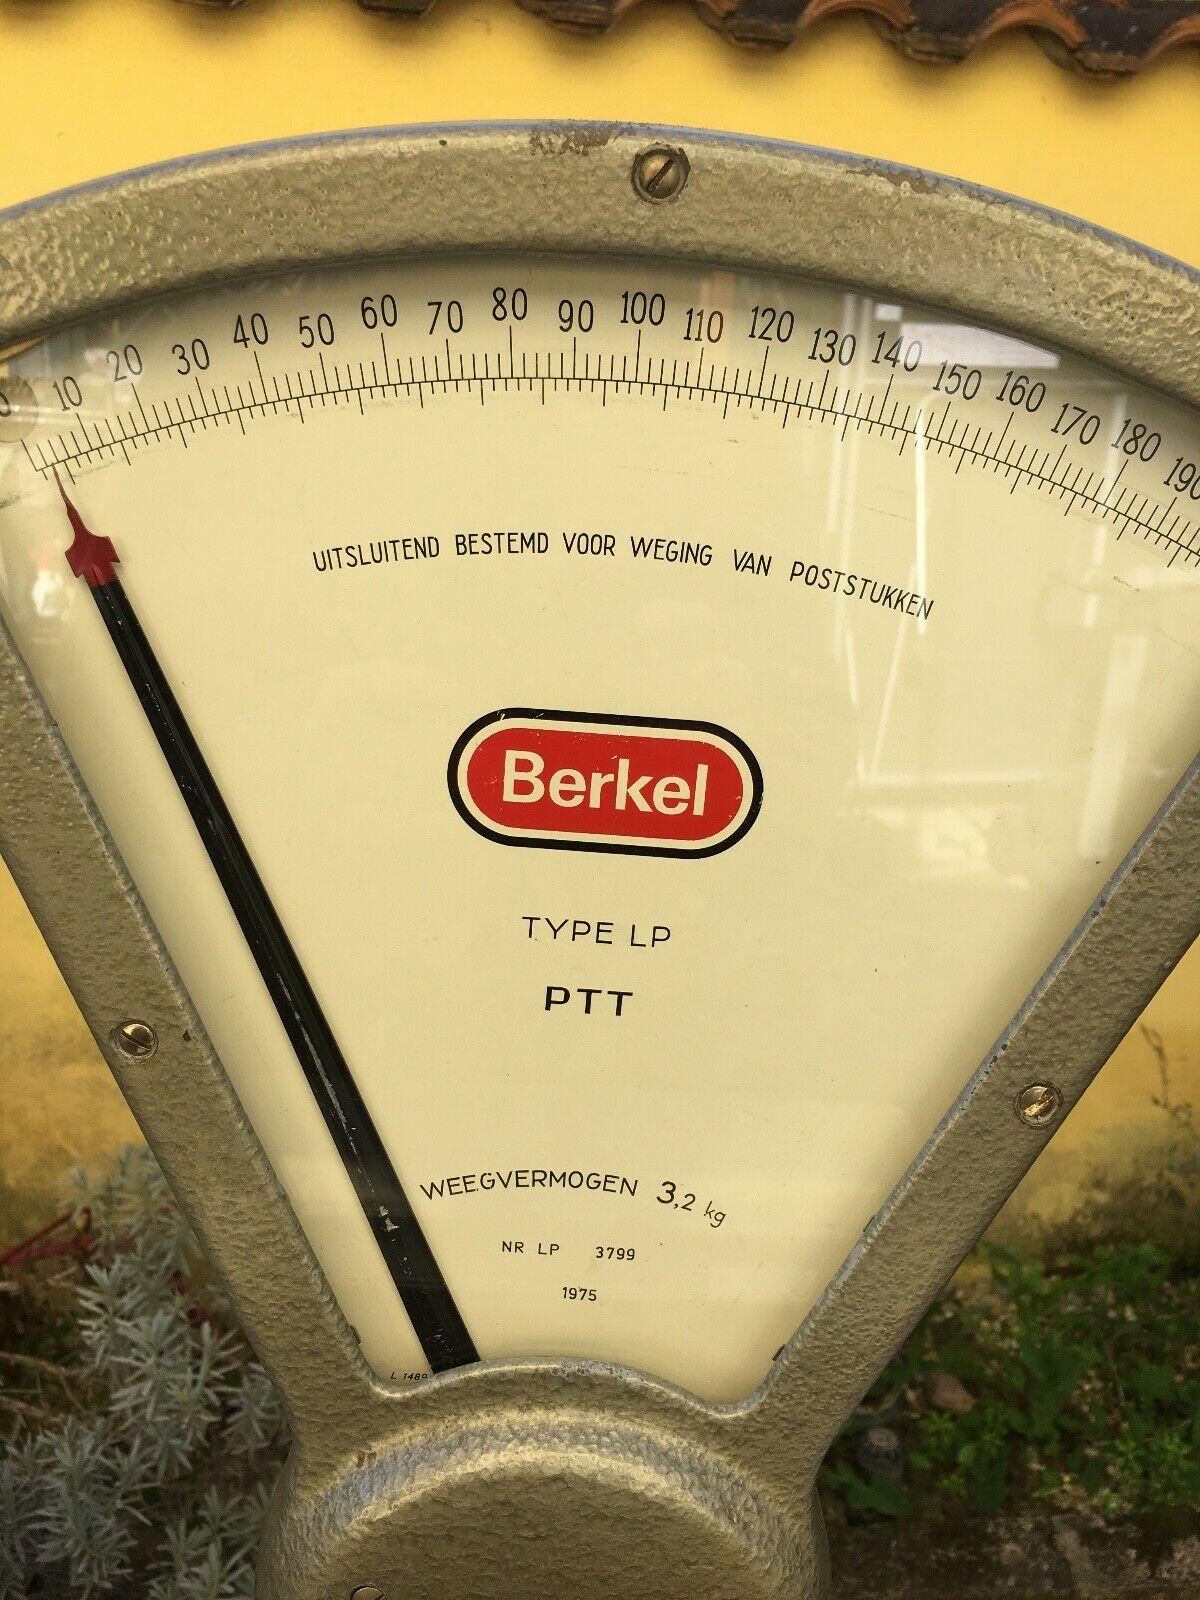 Other Berkel Scales For Sale